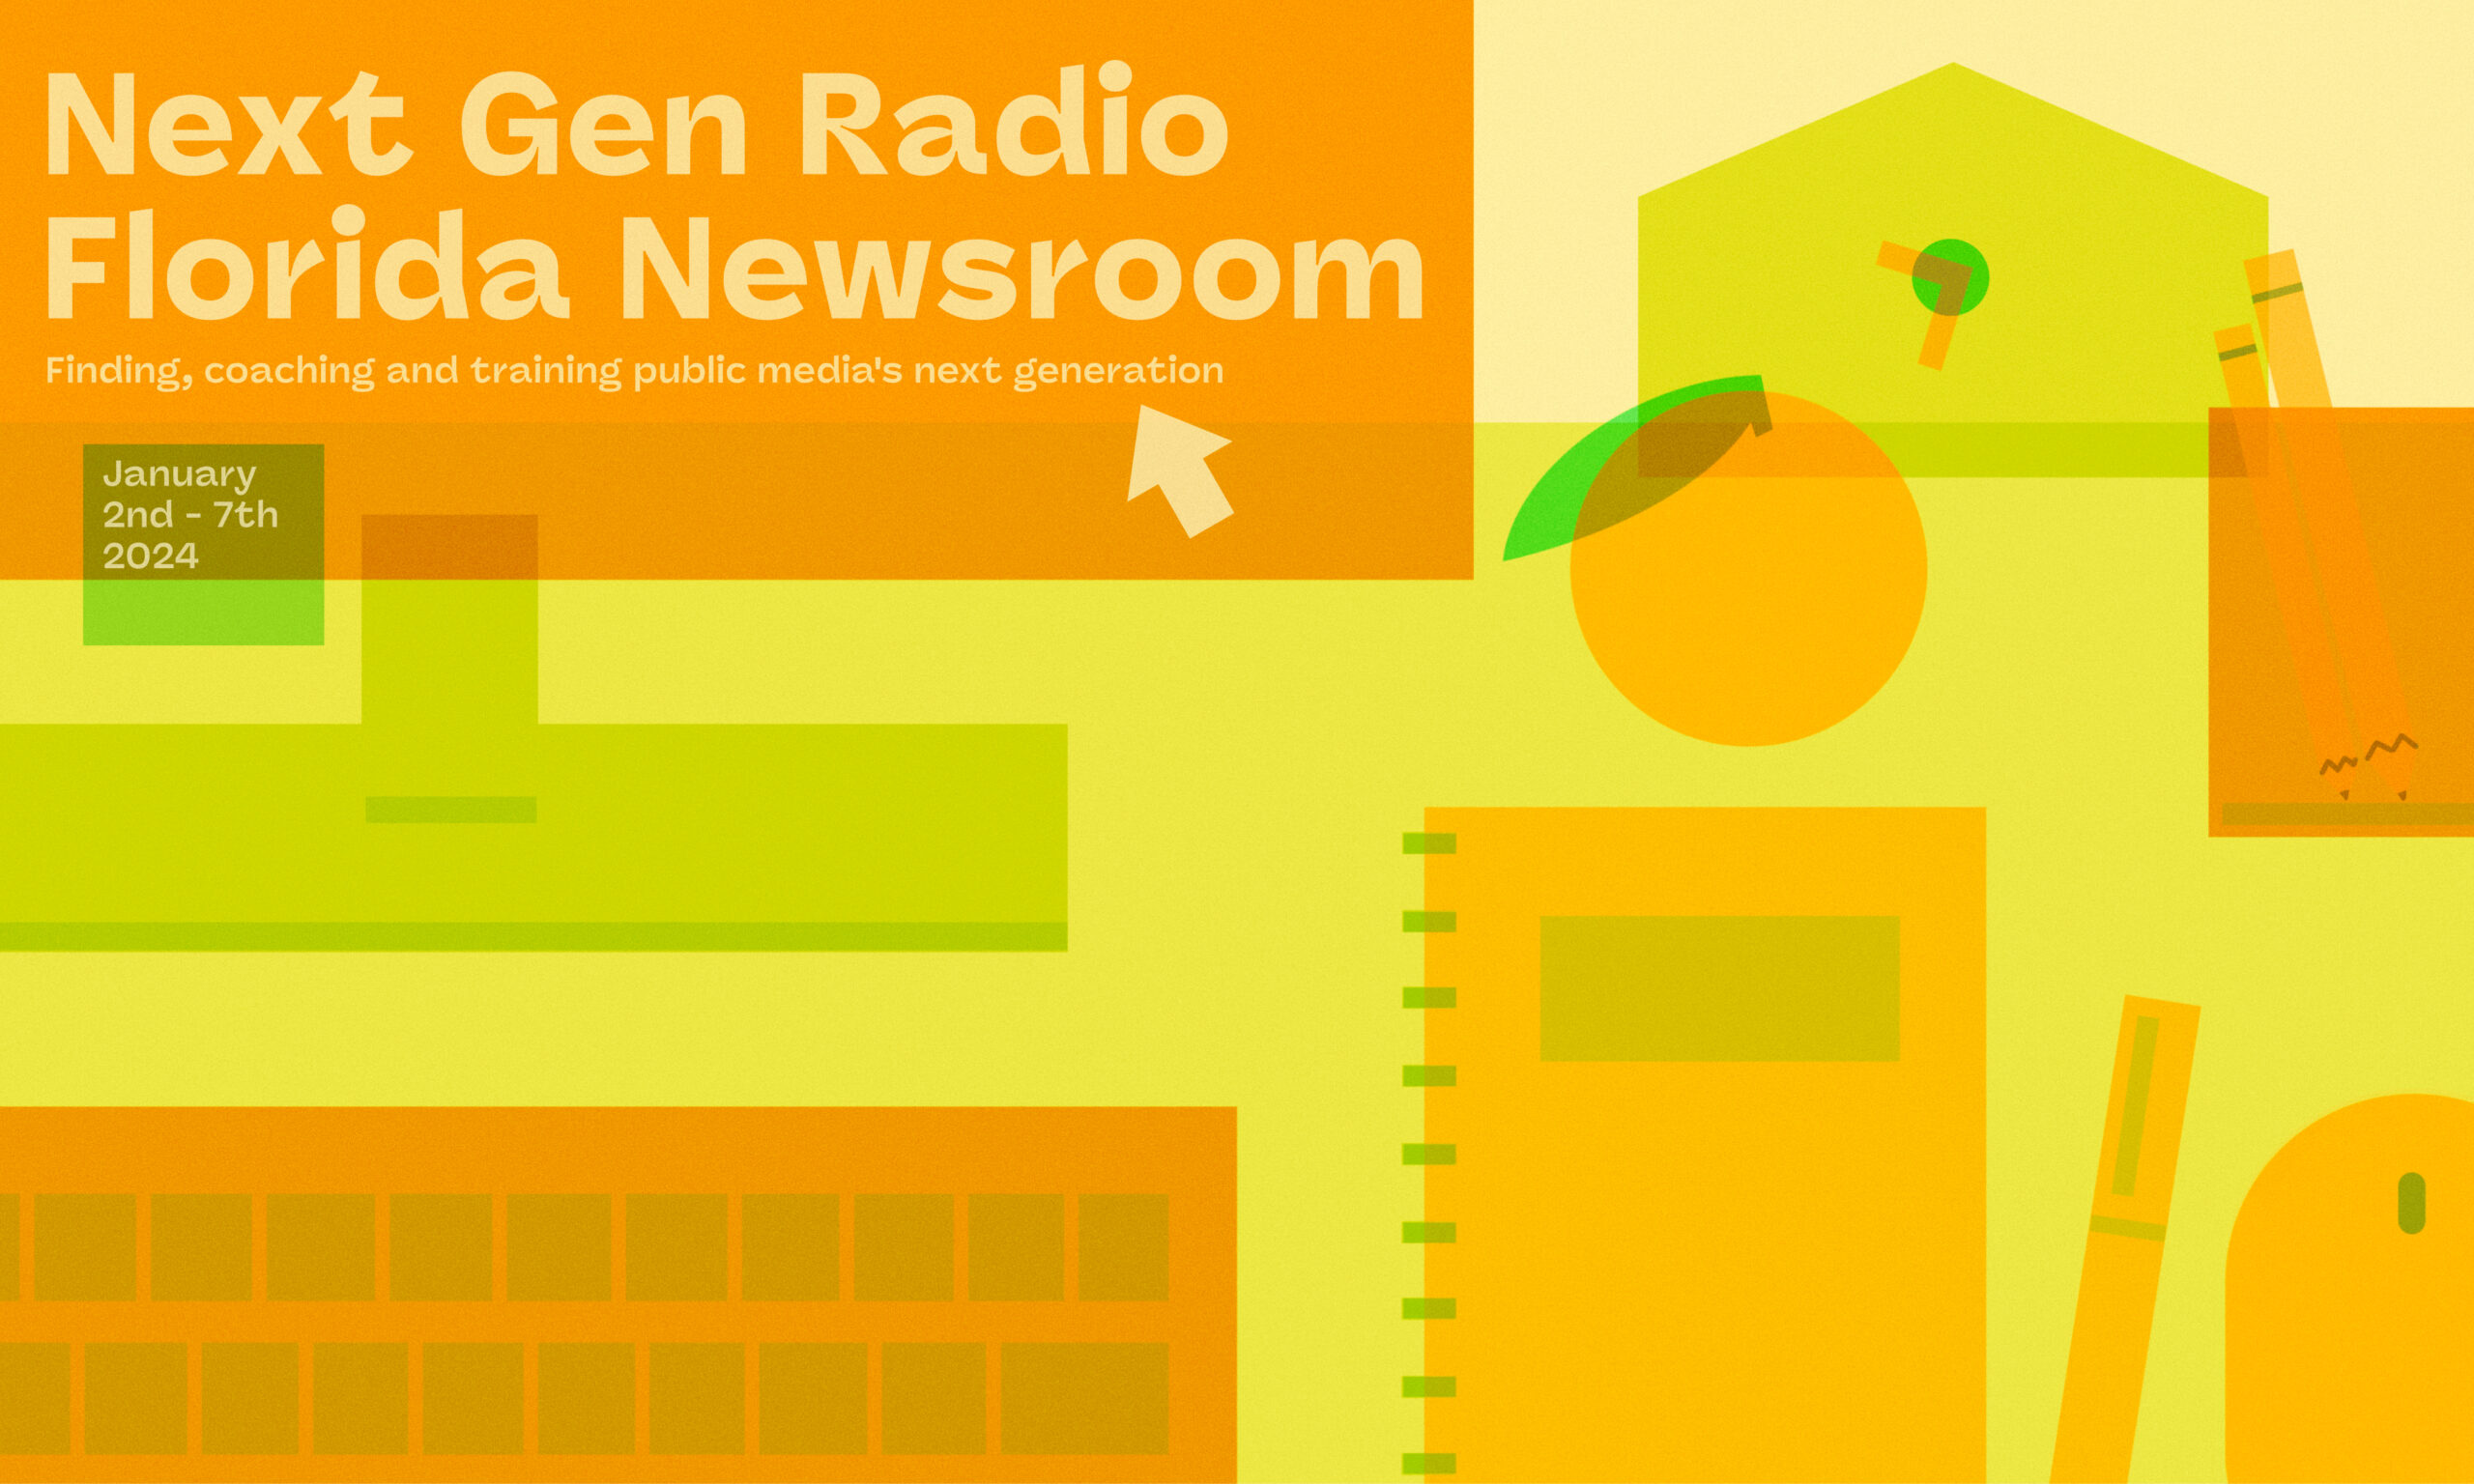 The illustration portrays a desk with various items: a computer monitor, keyboard, notebook, computer mouse, notebook, stationary, clock, and an orange. There is text reading “Next Gen Radio Florida Newsroom. Finding, coaching and training public media's next generation” on the computer screen and “January 2nd-7th 2024” written on a small sticky note.